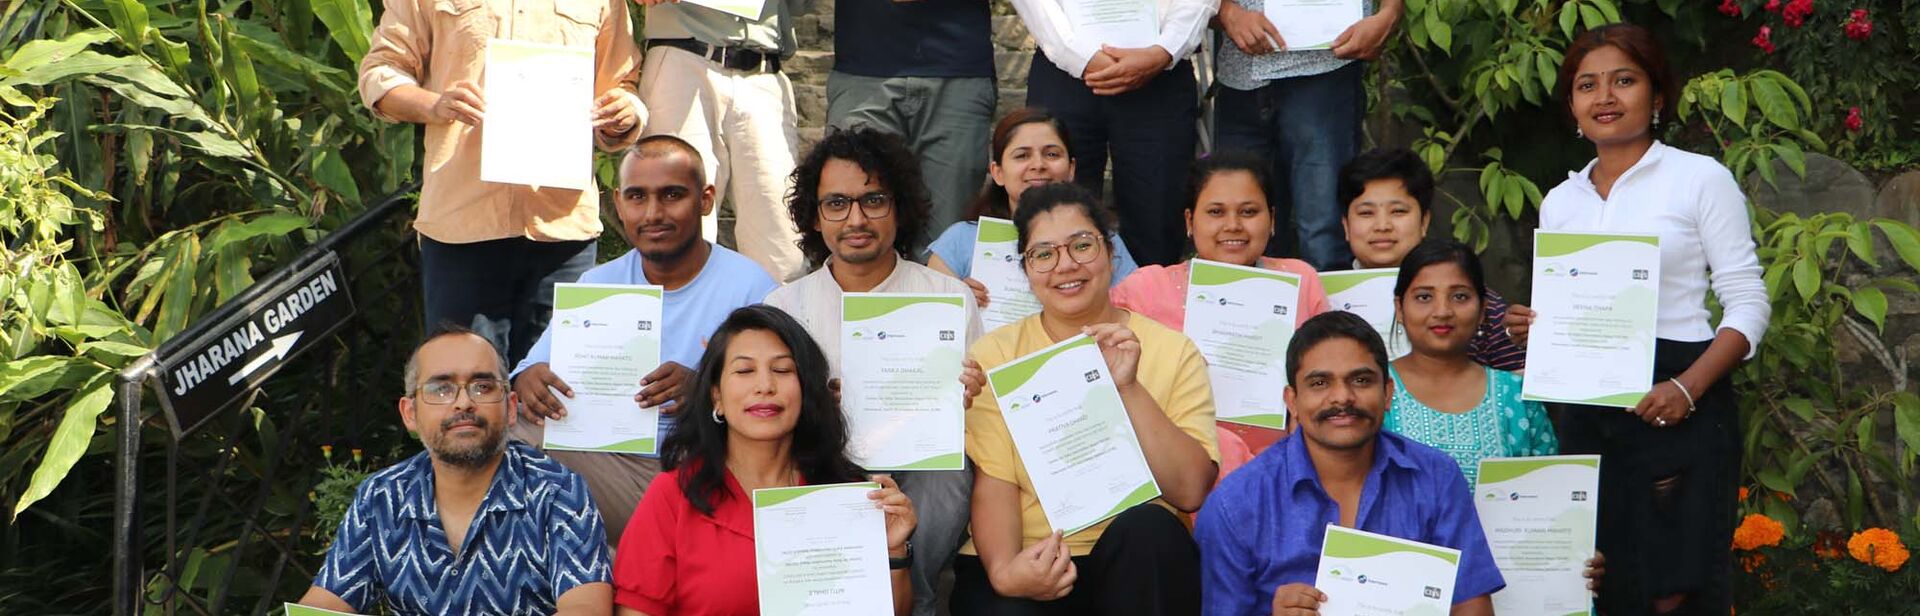 Participants look at the camera holding up certificates